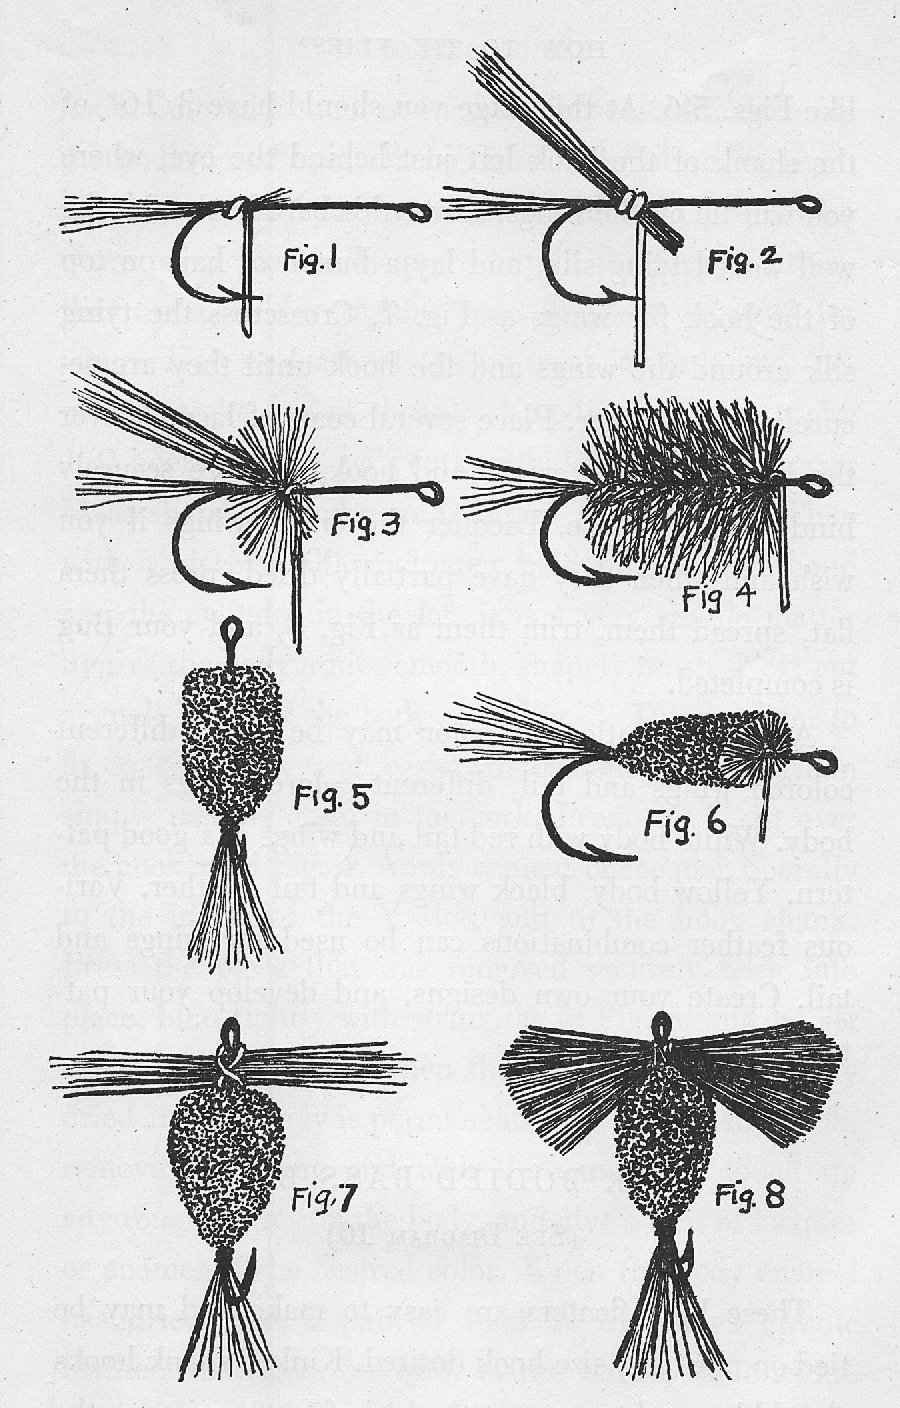 Page sized diagram
showing drawings of bass bug construction.